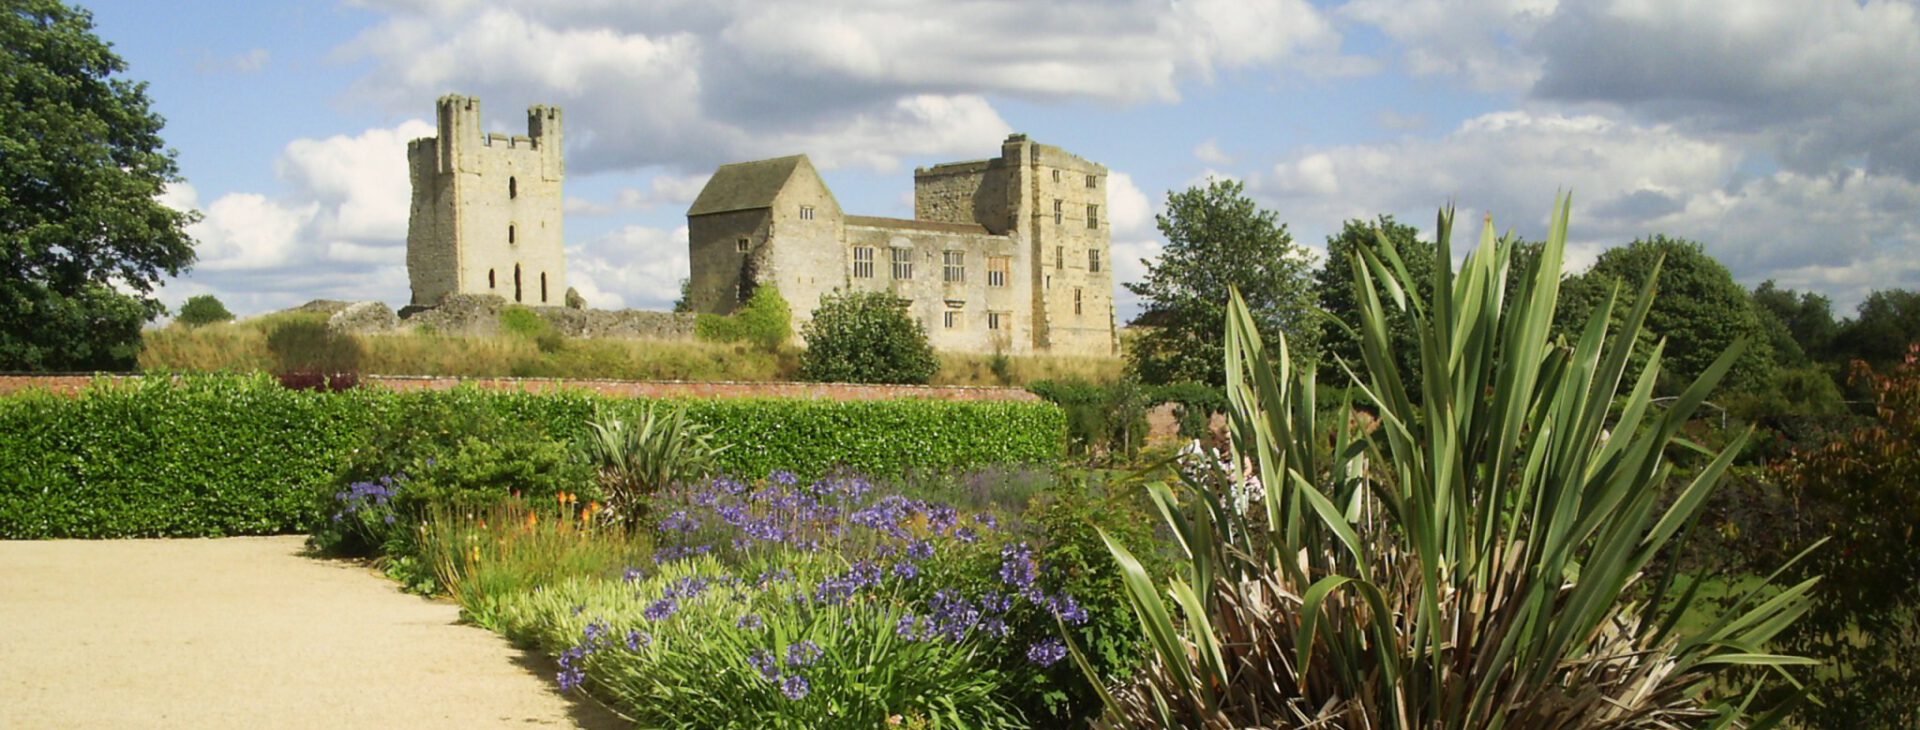 Stately walled gardens with ruins of Helmsley Castle in the background